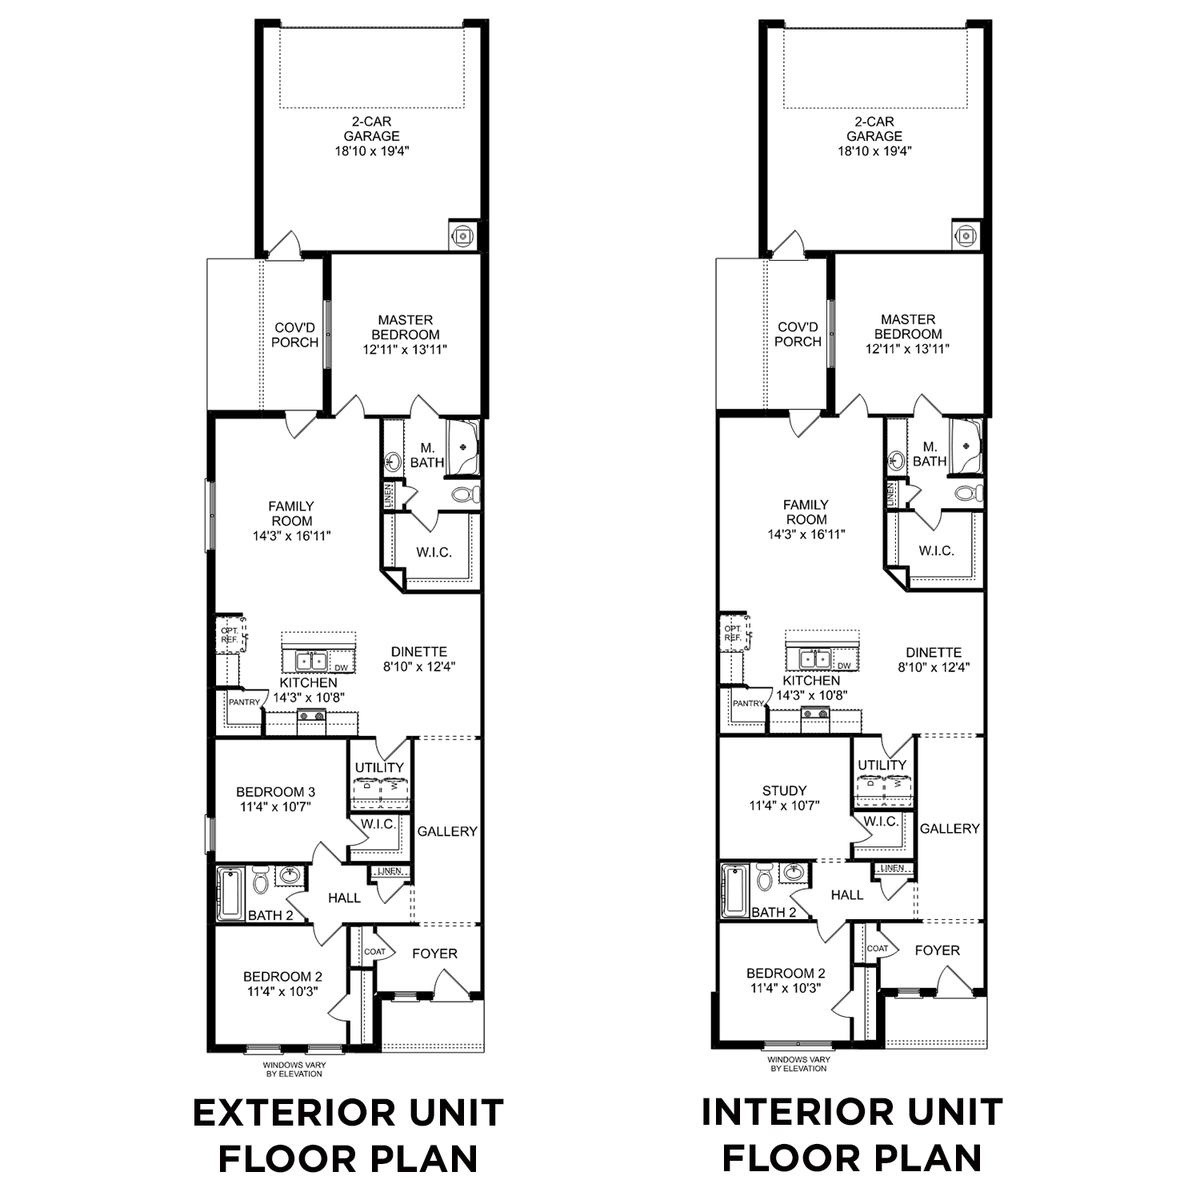 1 - The Camilla B floor plan layout for 423 Ronnie Drive in Davidson Homes' Cain Park community.